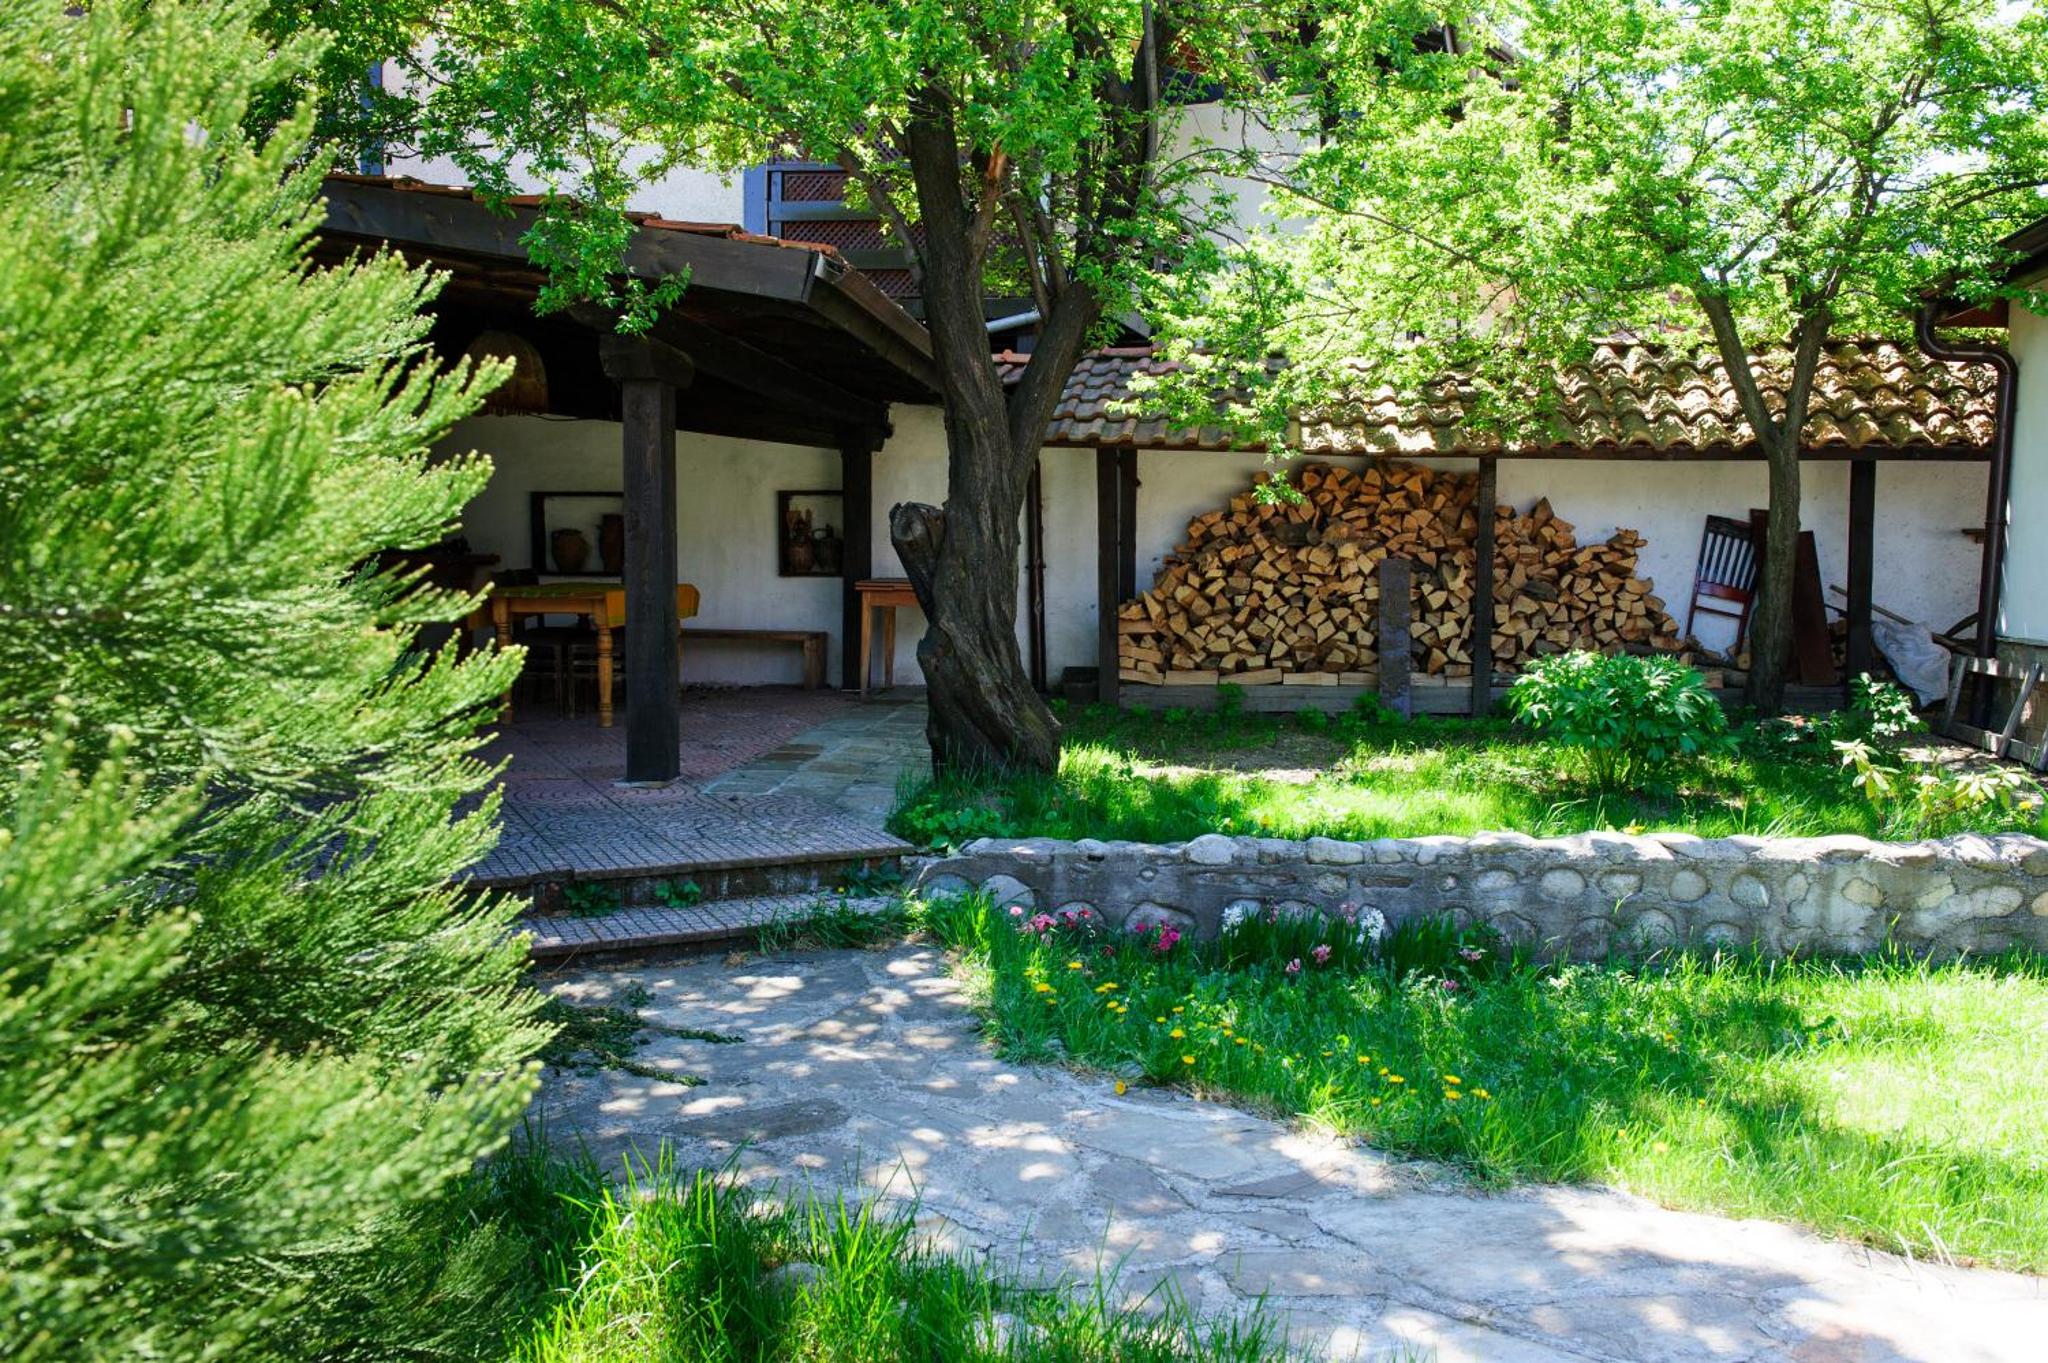 Self Catering Chalet Kulina